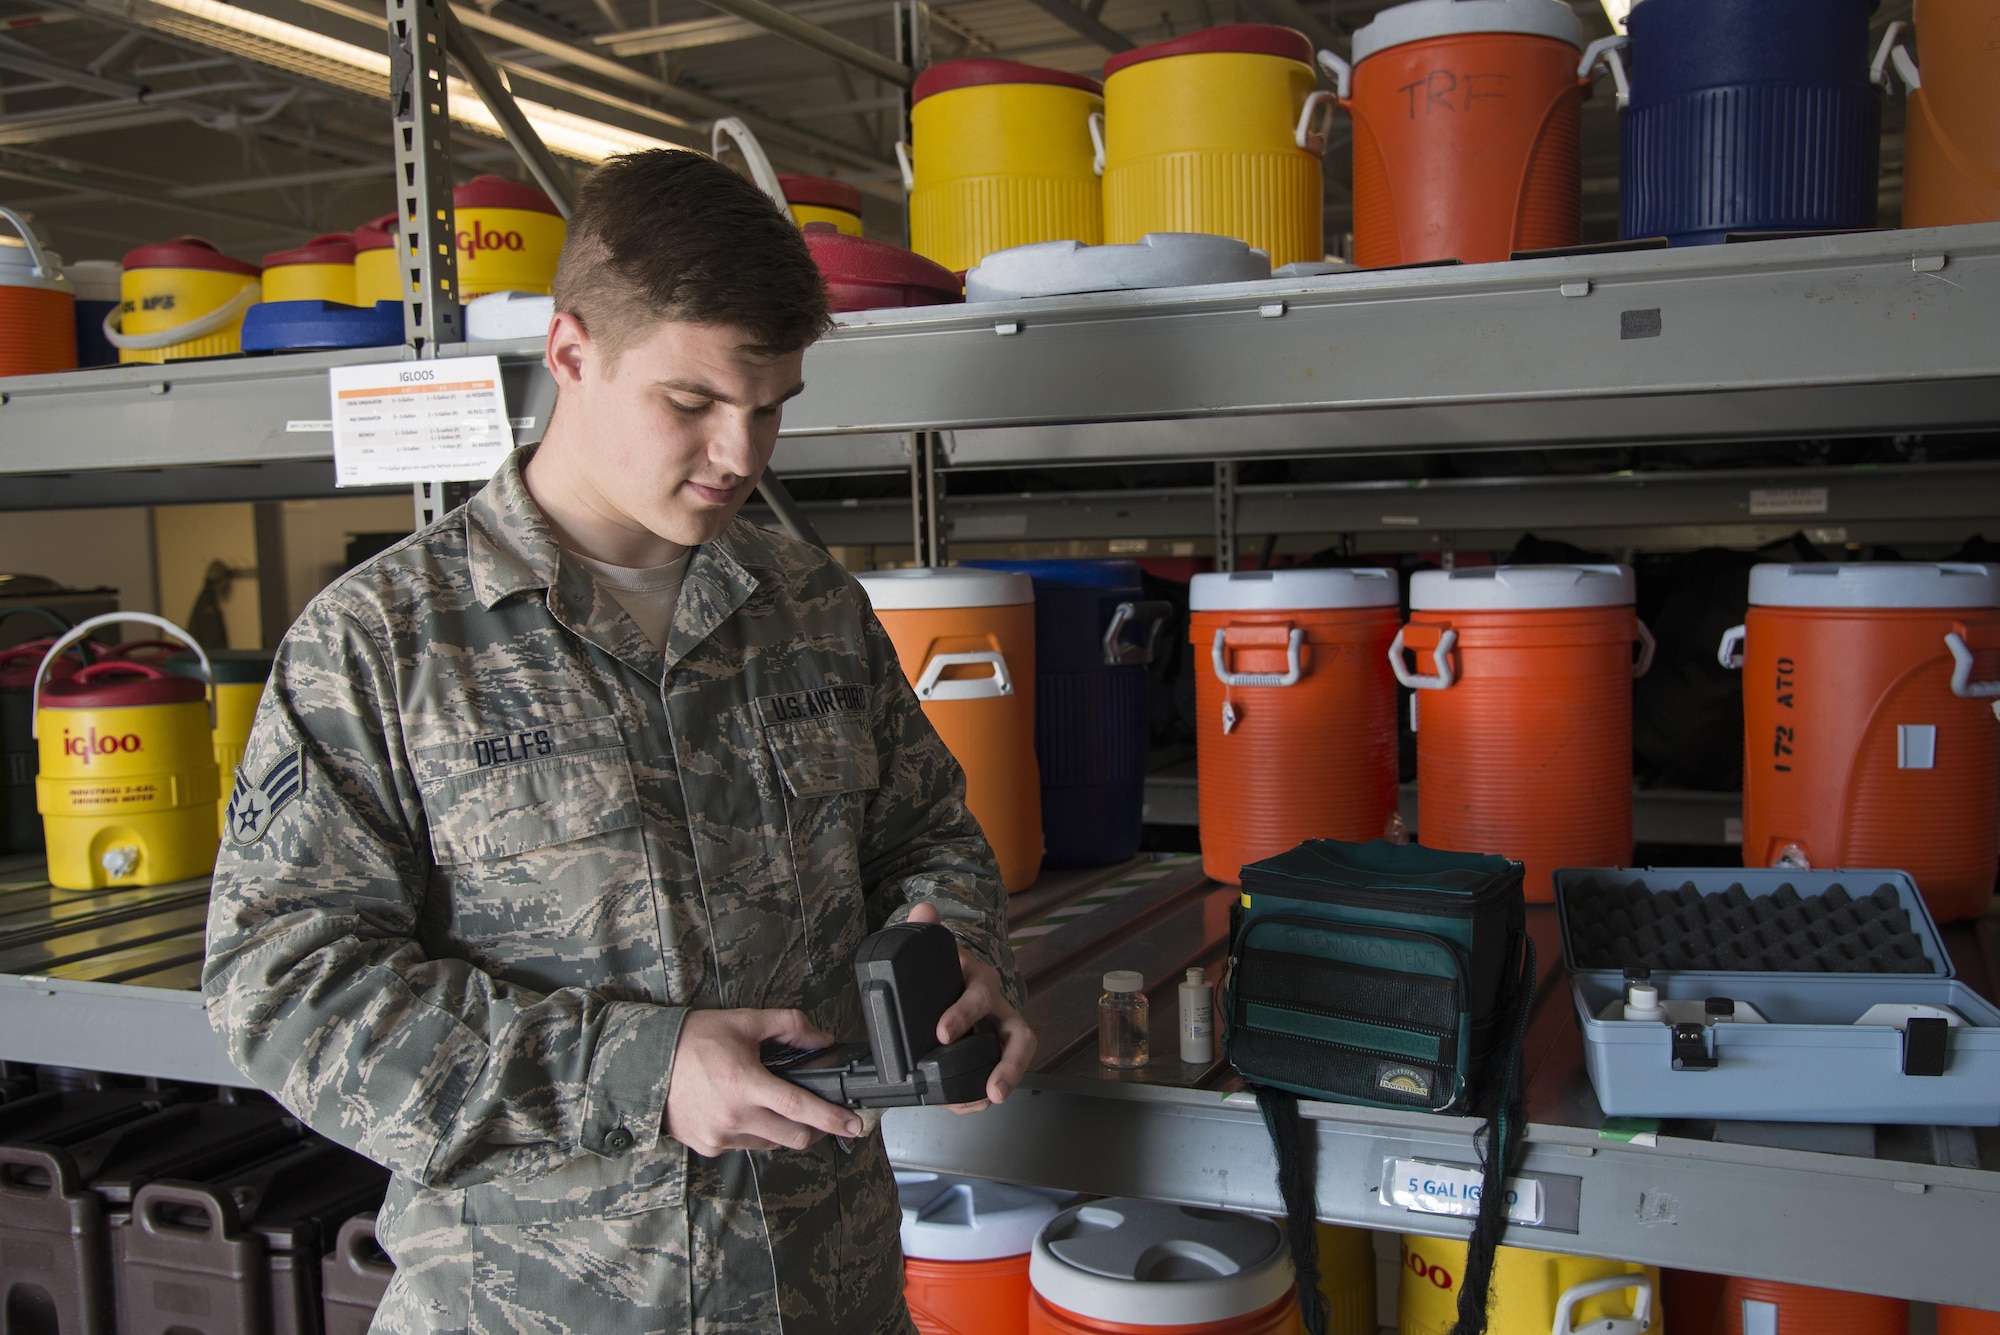 Senior Airman Alexander Delfs, 436th Aerospace Medical Squadron bioenvironmental engineering journeyman, conducts a pH test on a water sample Nov. 16, 2016, at an aircraft watering point on Dover Air Force Base, Del. All potable water used by aircrews comes through an aircraft watering point. (U.S. Air Force photo by Senior Airman Aaron J. Jenne)